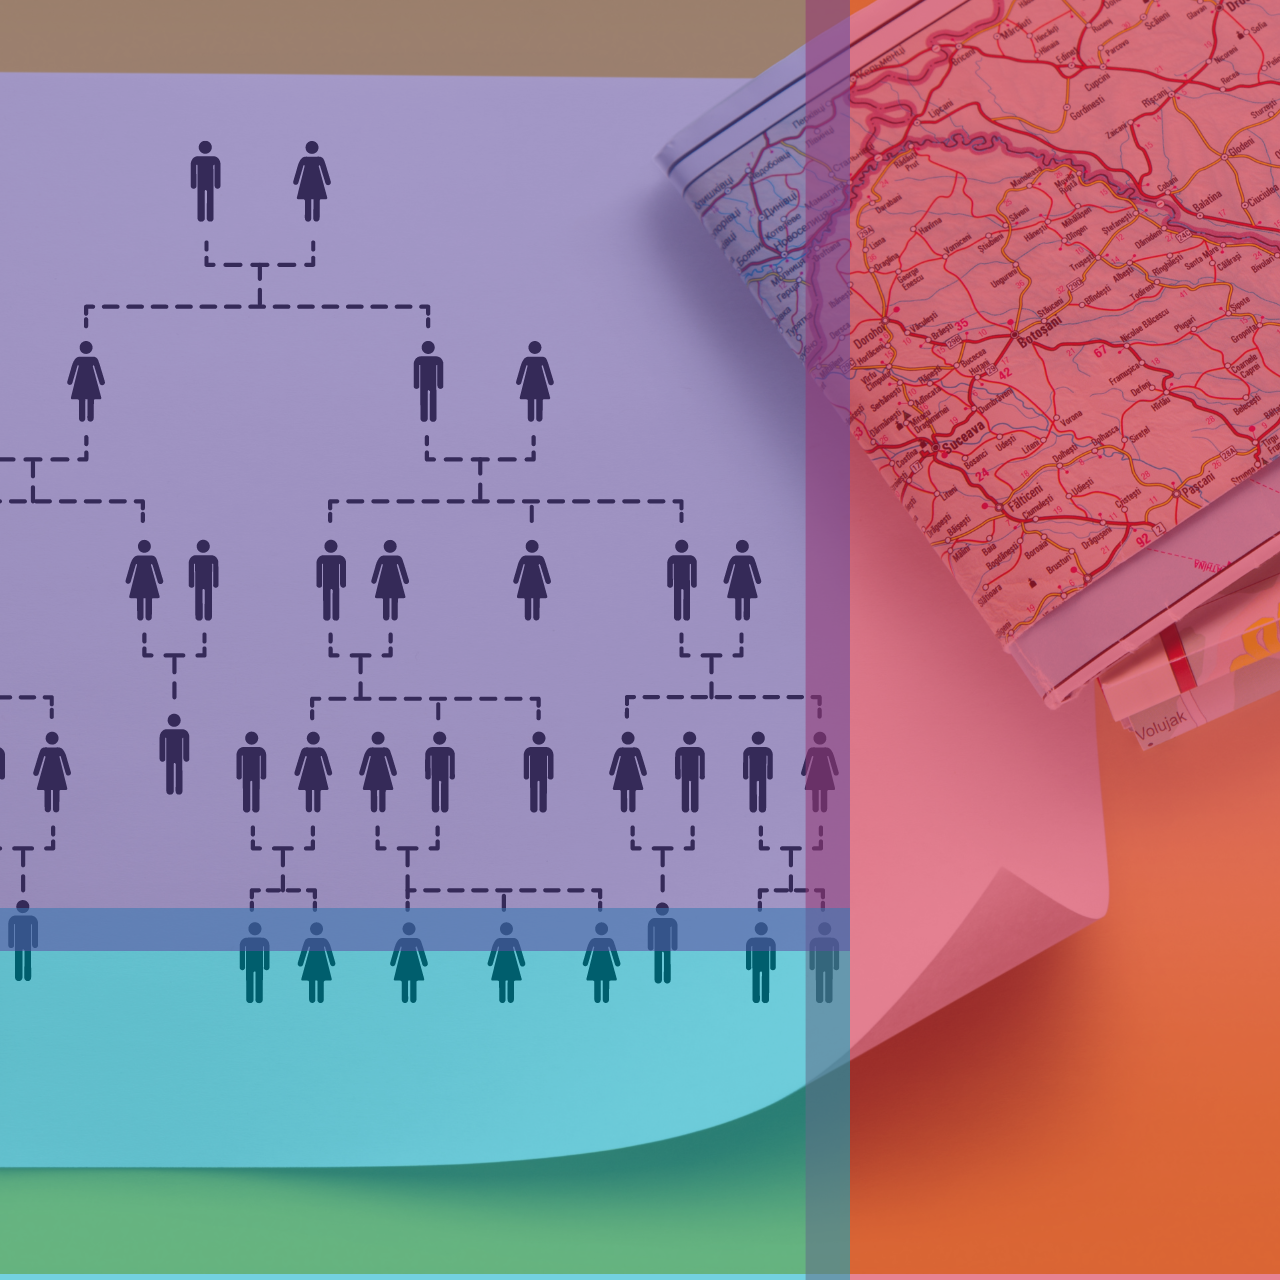 A family tree juxtaposed with a map, overlaid with the library colors.